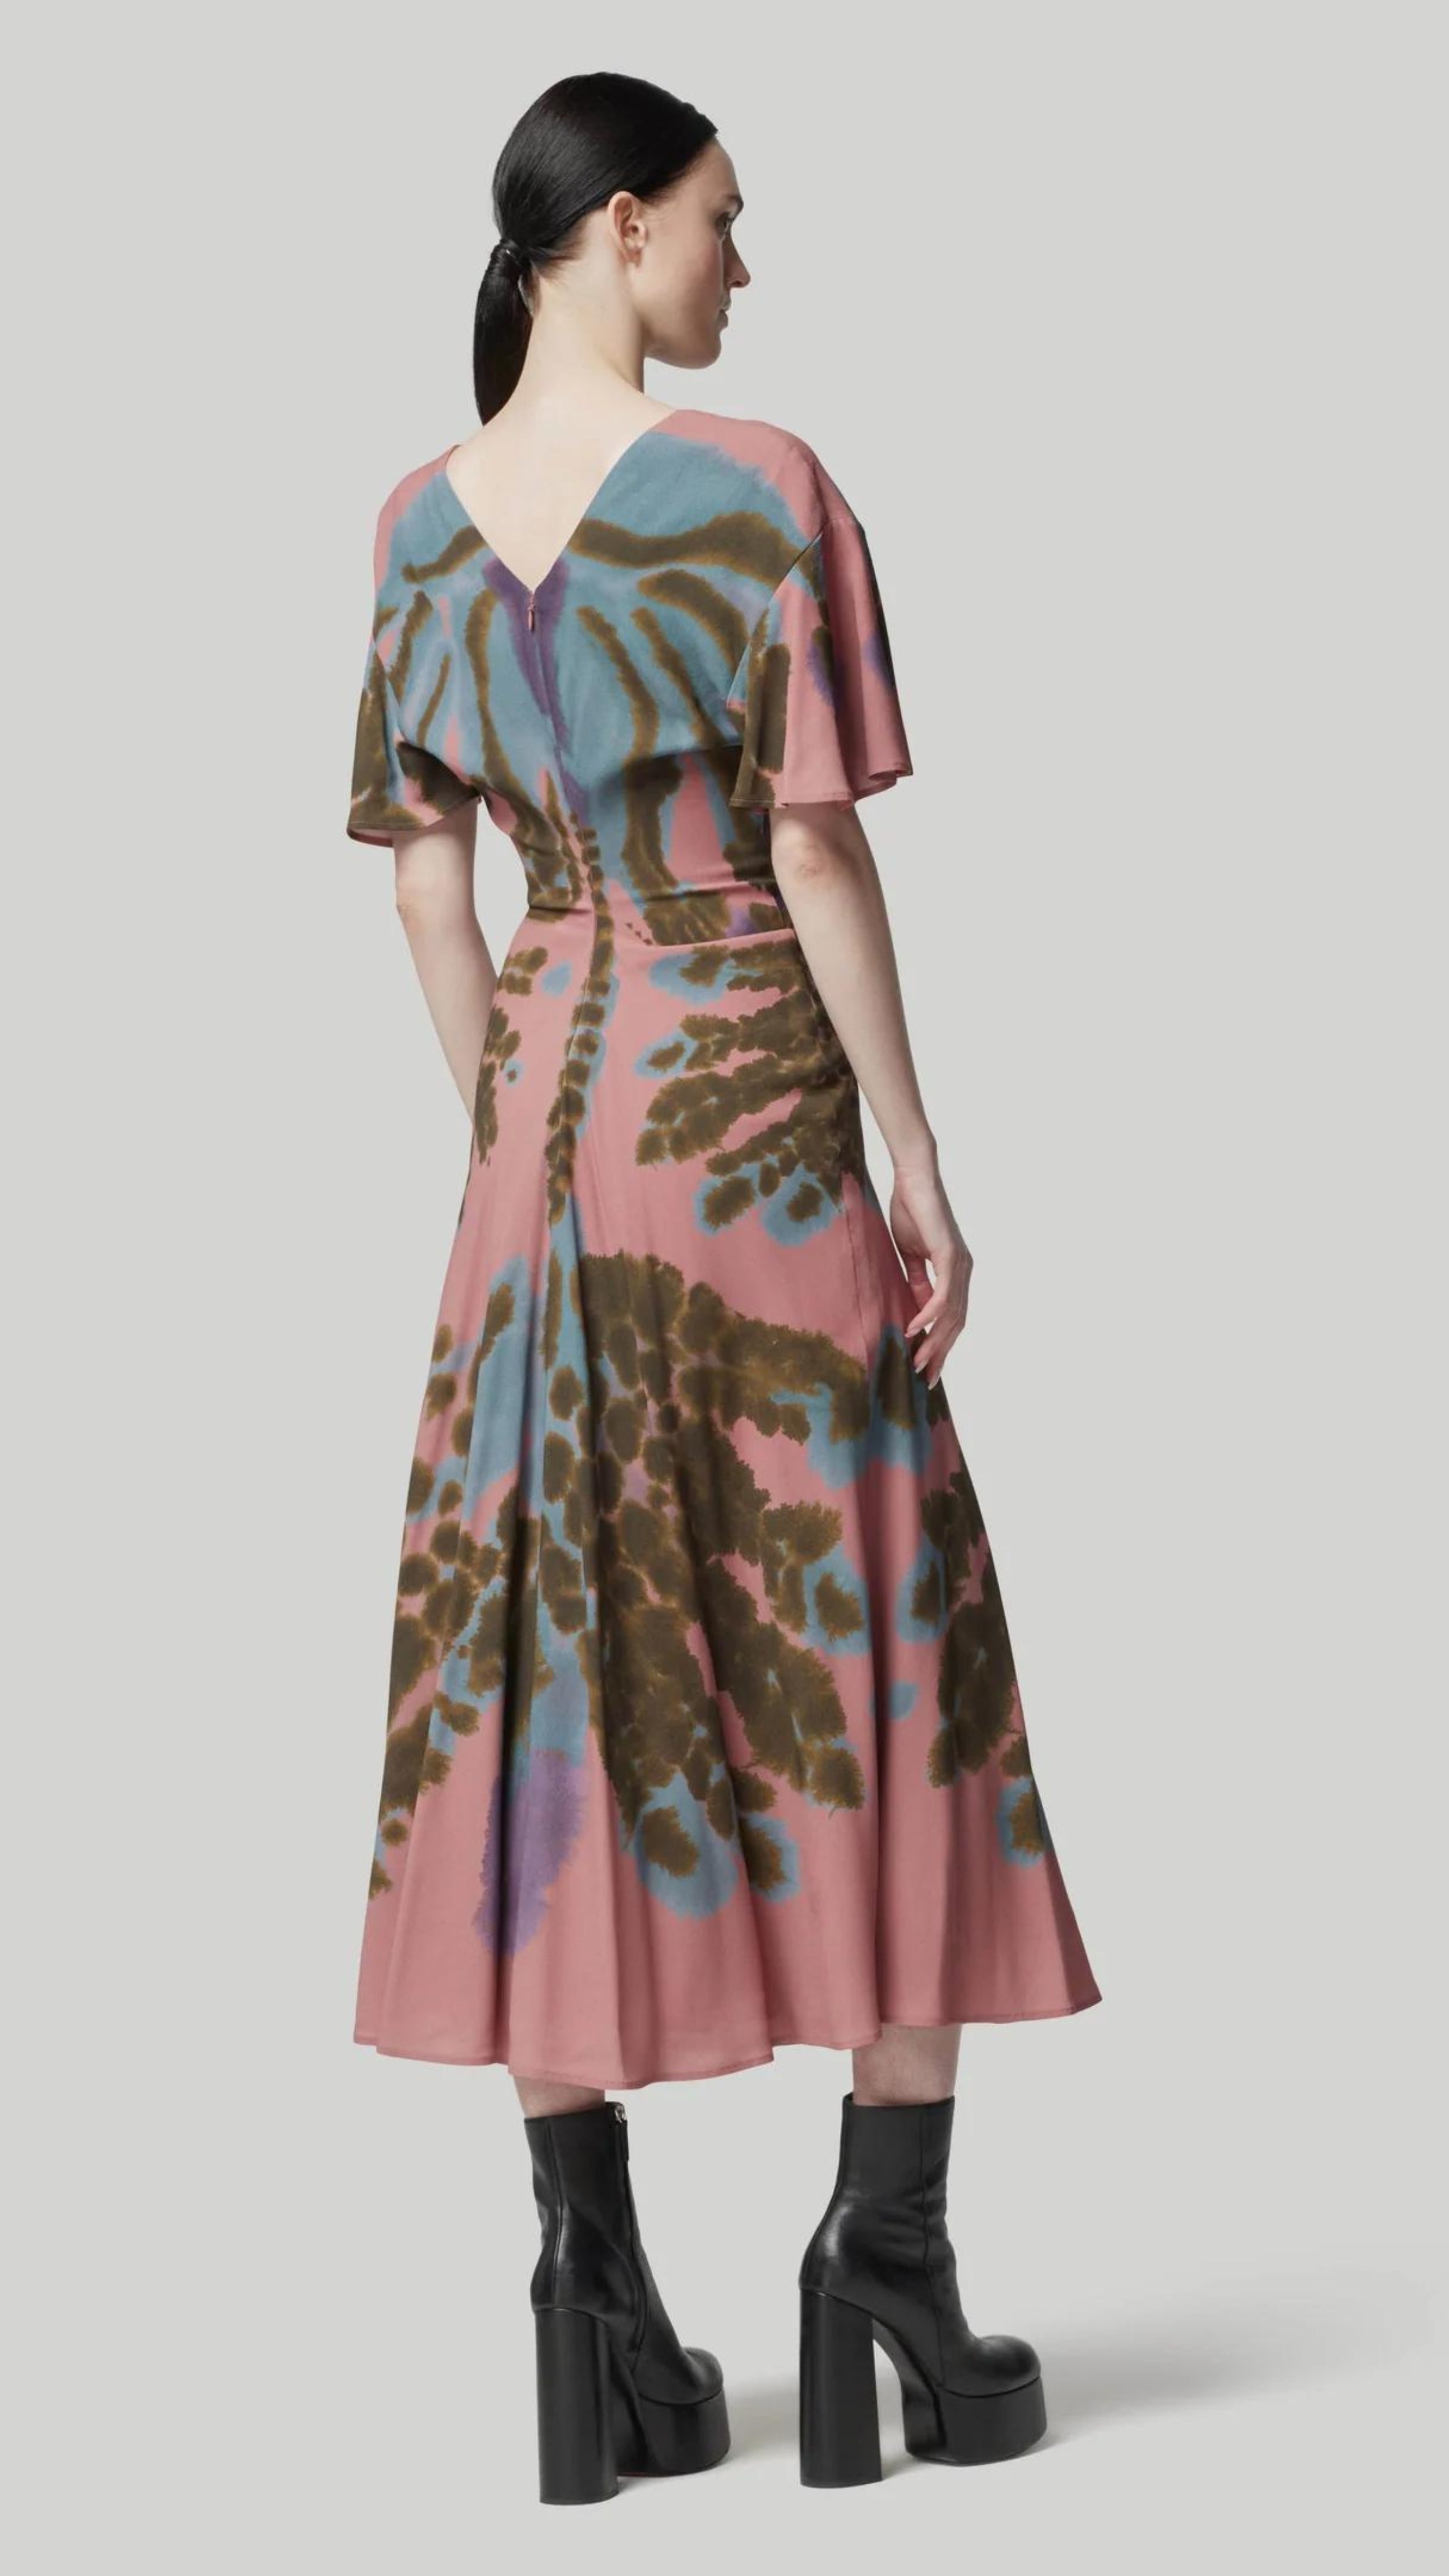 Altuzarra Pelopenese Dress. Rose pink, sky blue and green rorschach pattern midi dress. With a v neckline and soft draping half sleeves. Flowing skirt with waist line rouching. Shown on model facing to the back.